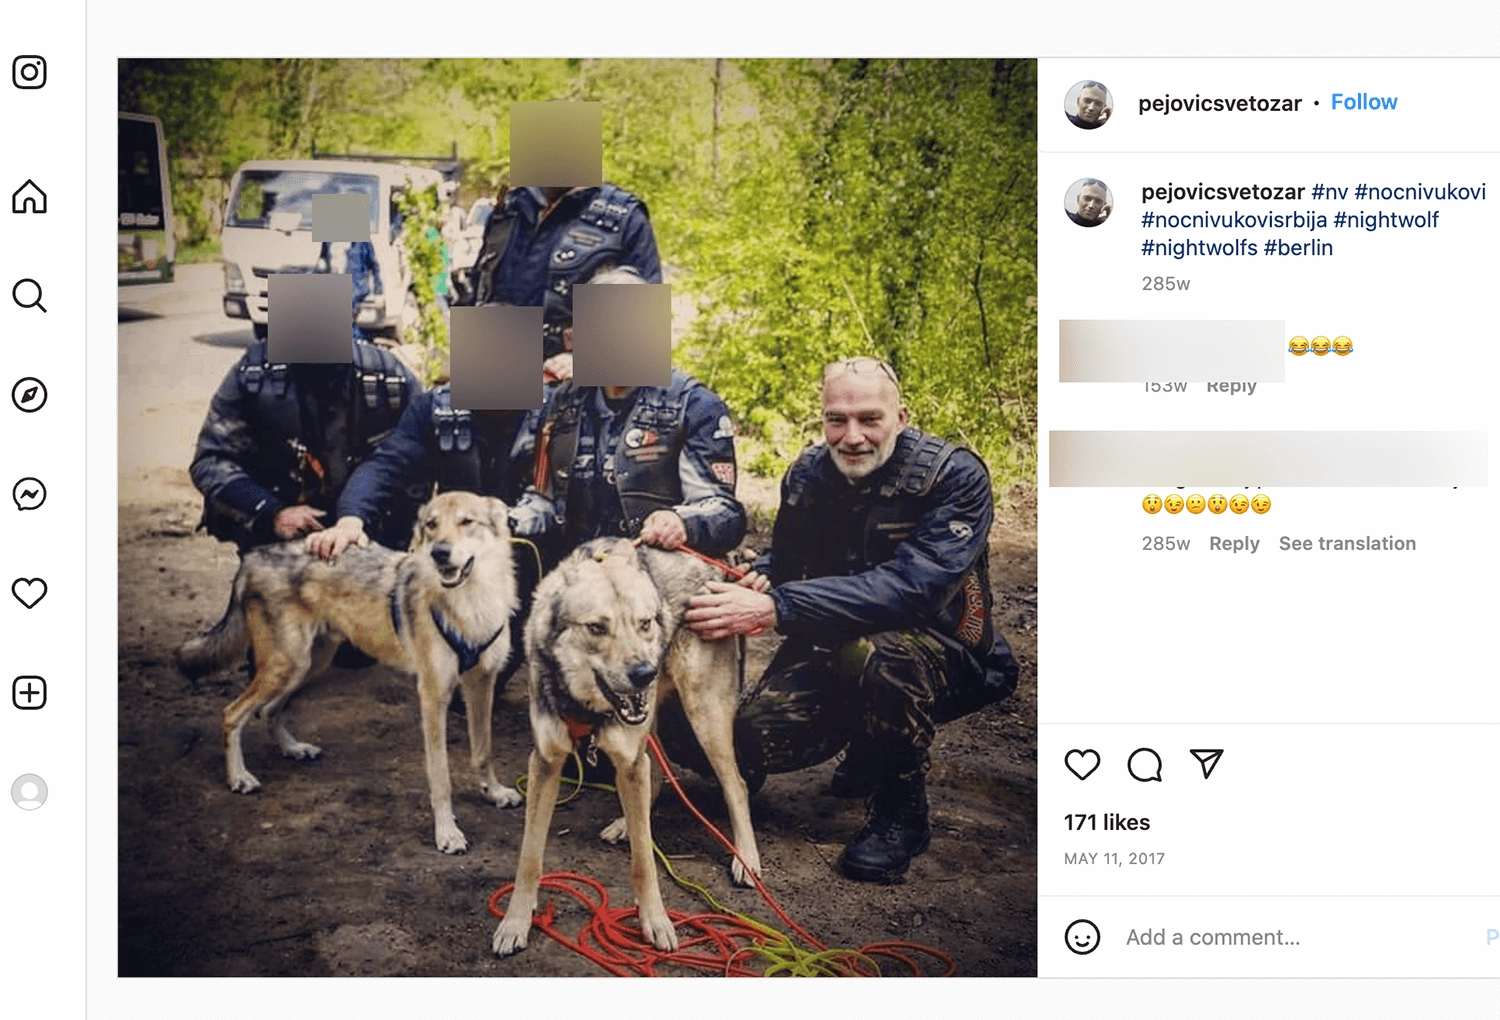 The Instagram account for Svetozar Pejović (a.k.a. “Peja”) shows him with other people wearing Night Wolves gear.